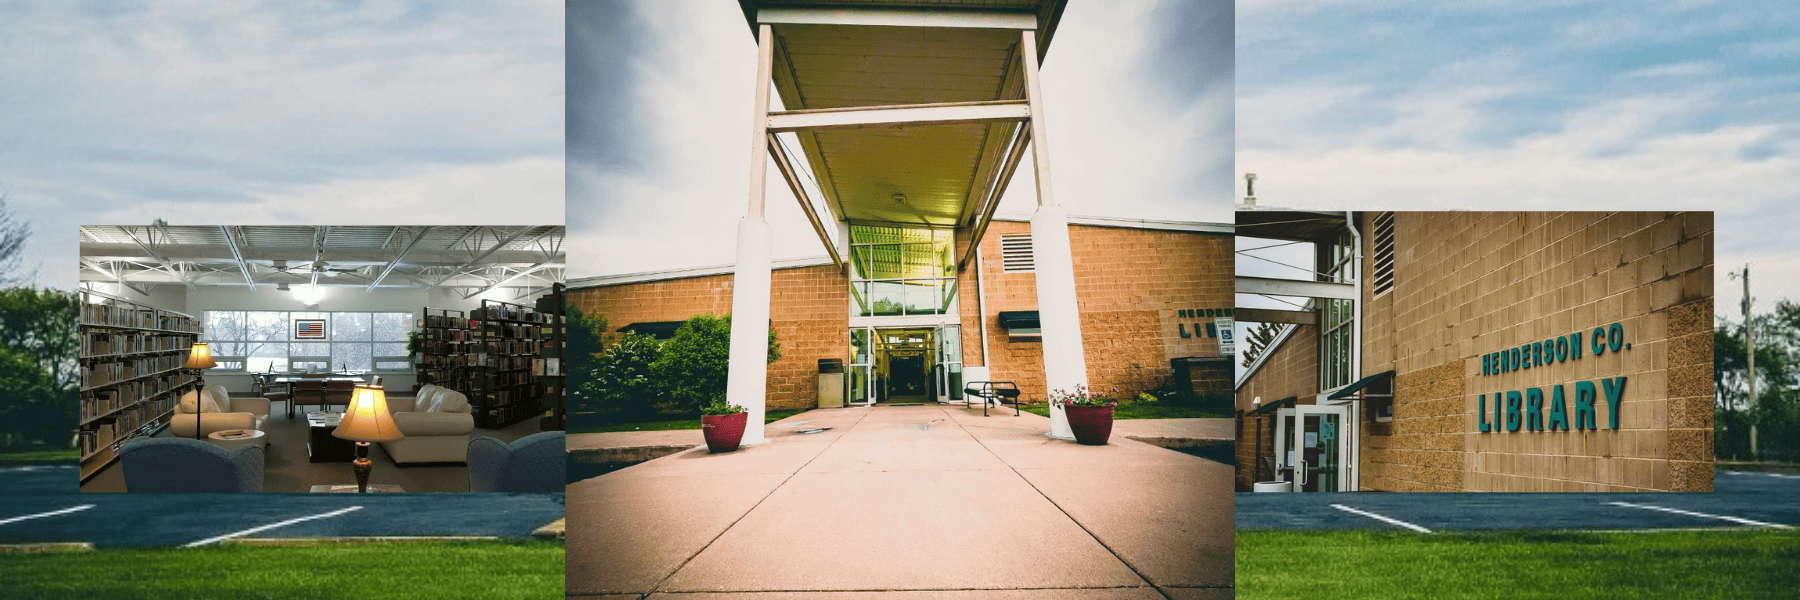 Image of Henderson County Library